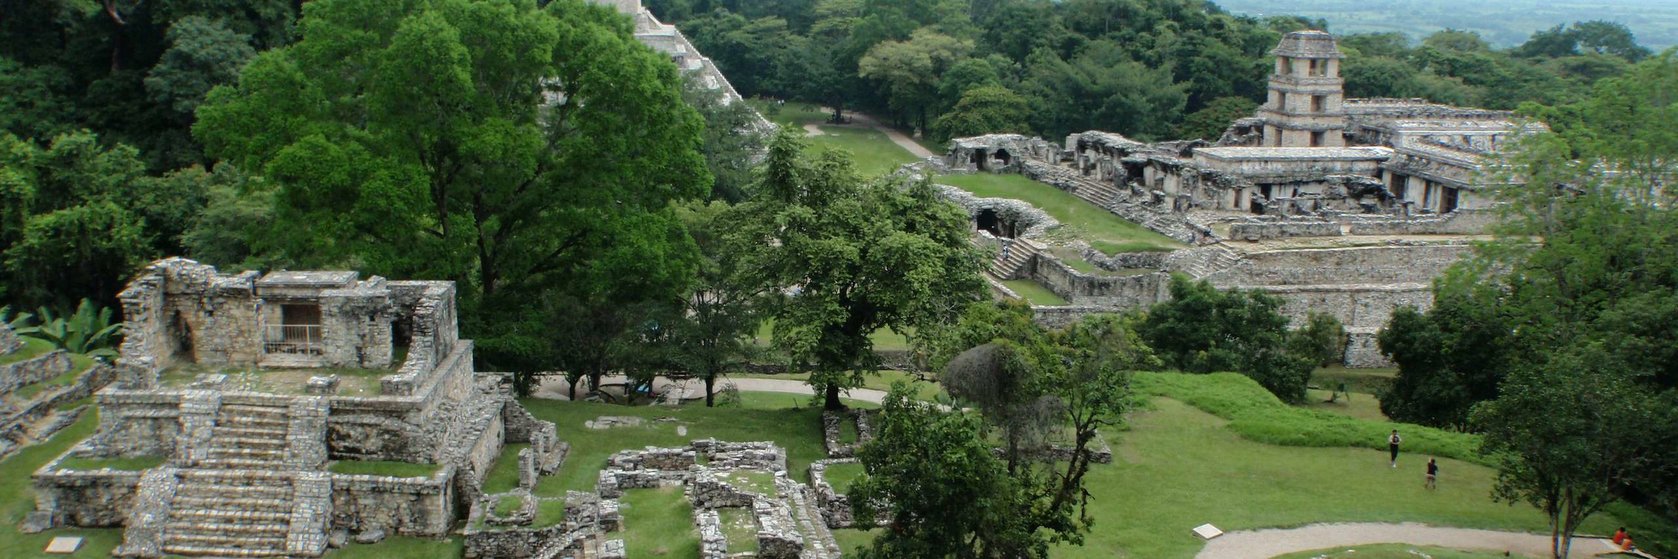 Hotely Palenque